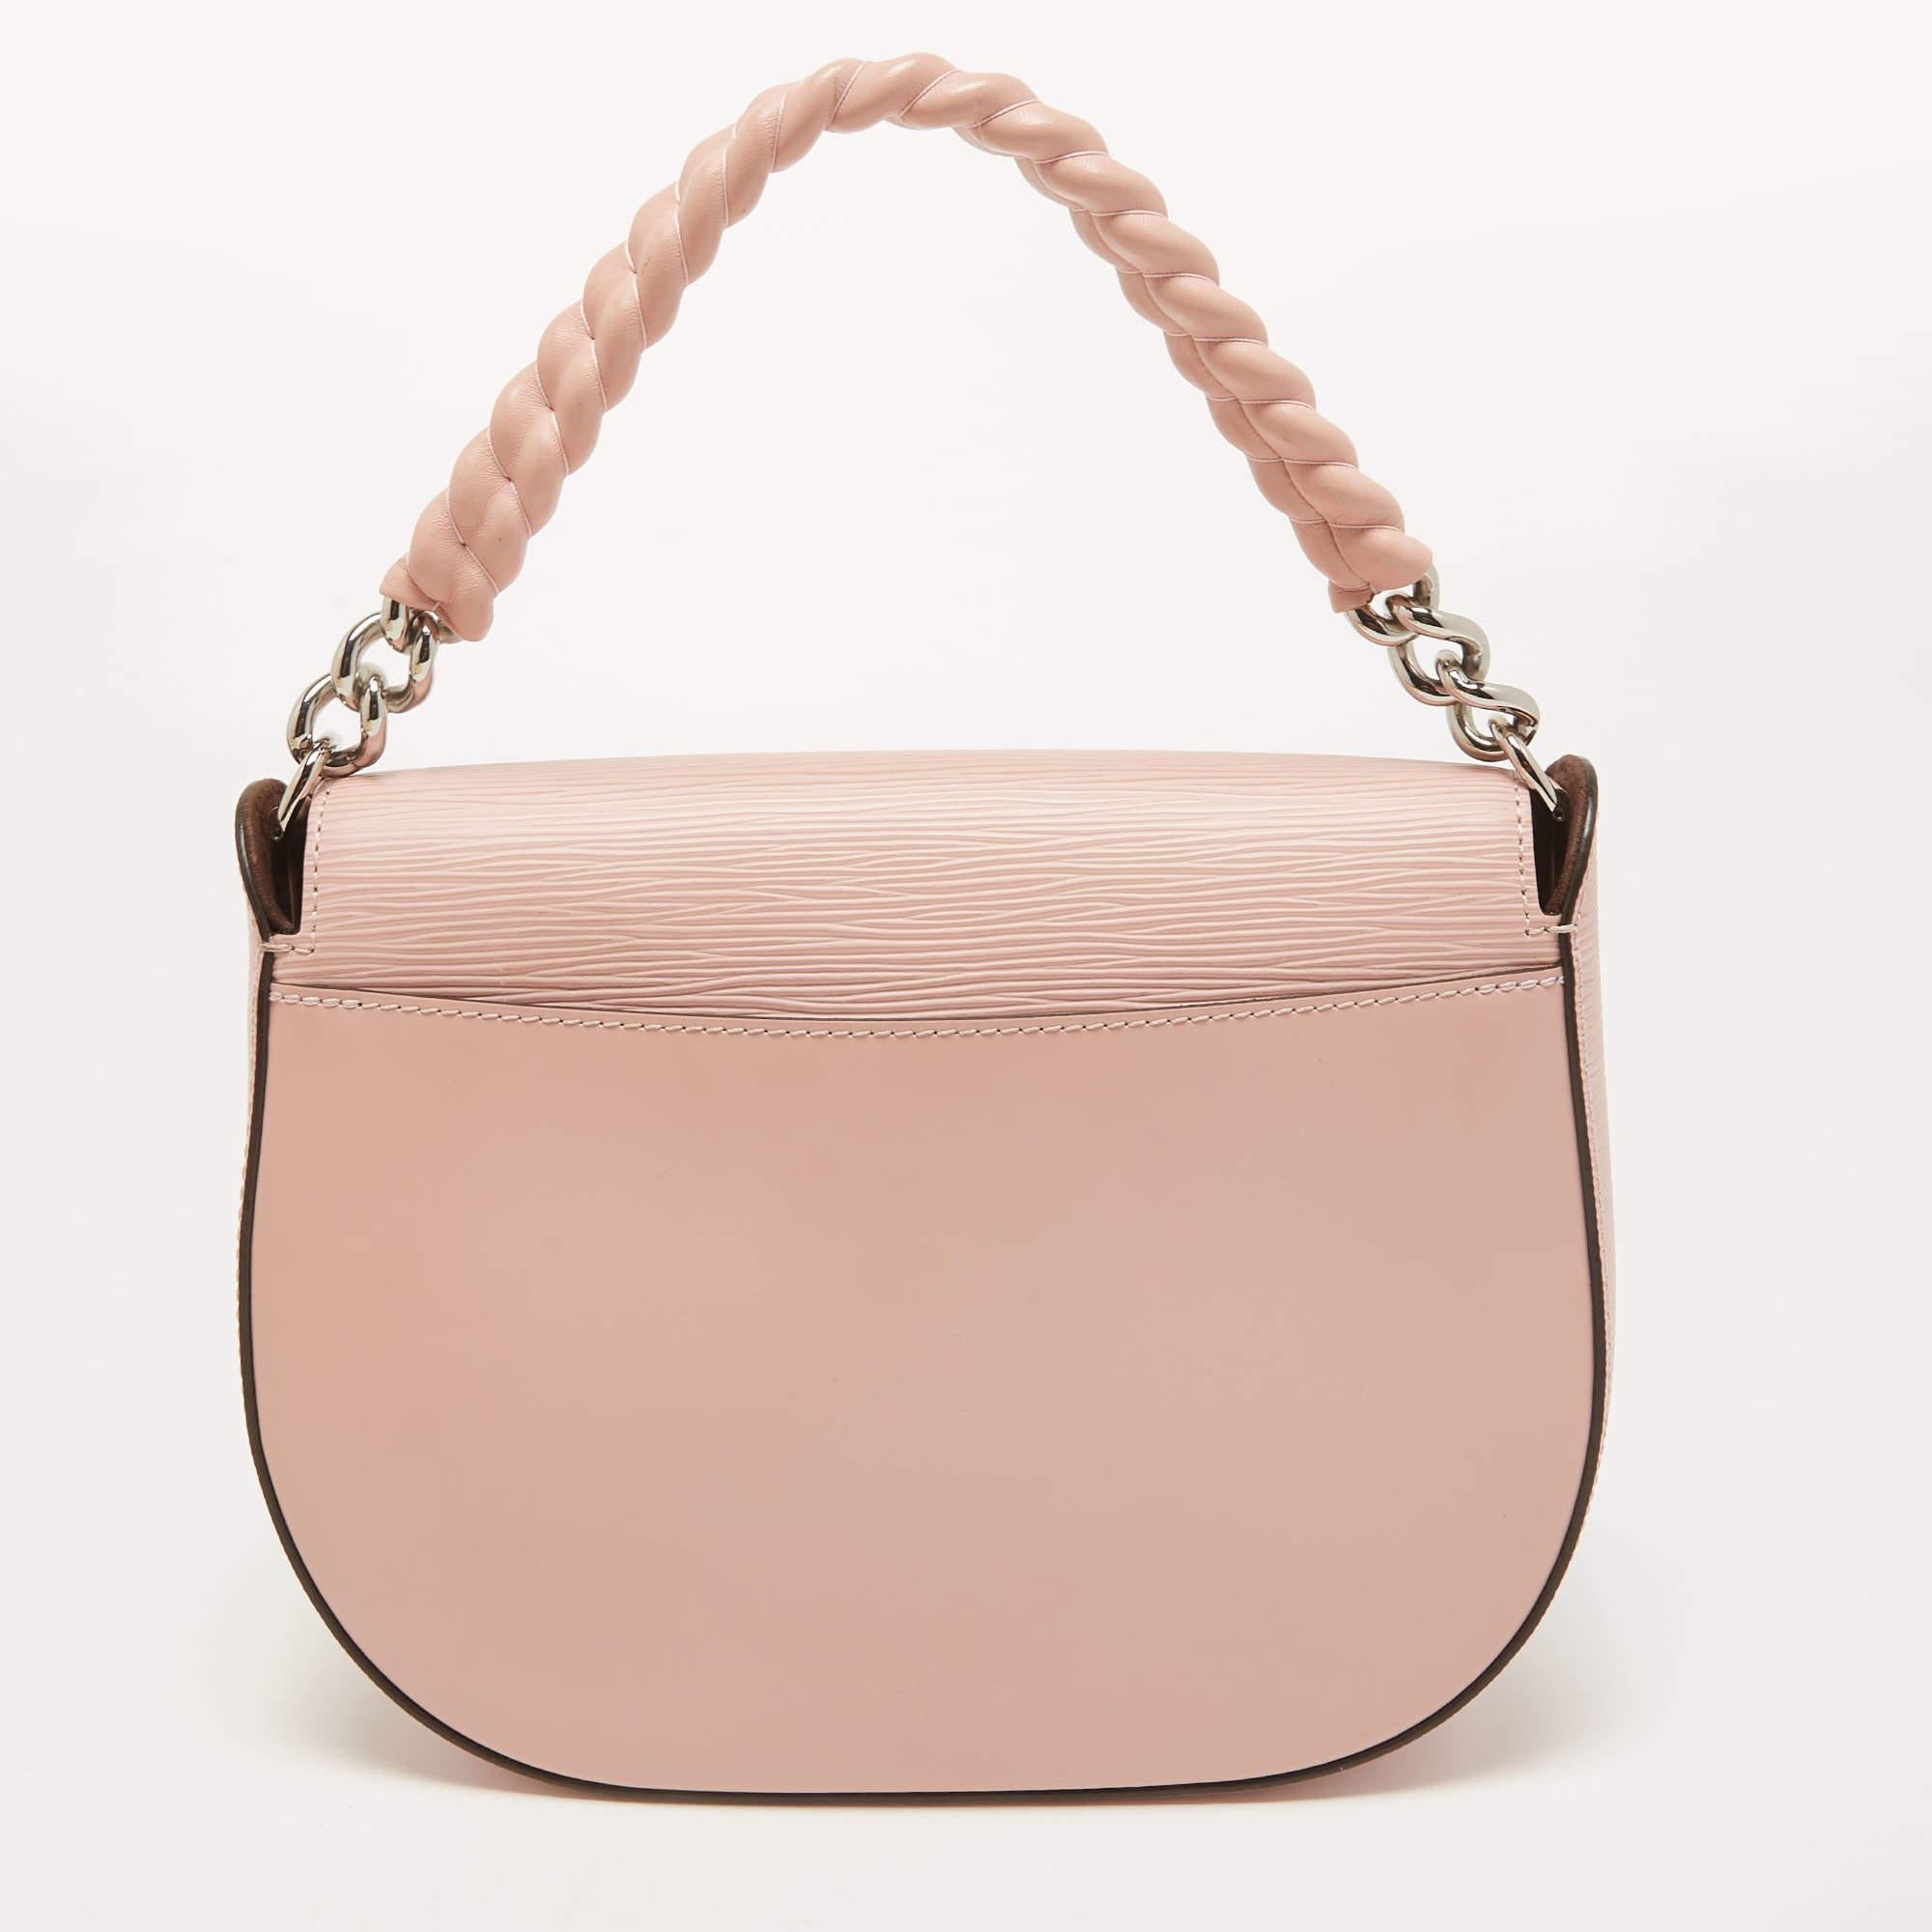 Another desirable bag from Louis Vuitton is the Luna. This beauty is crafted from smooth leather and also Epi leather, which is a material with a grainy texture and high resistance to wear or tear. The bag has a slightly rounded shape, a flap to